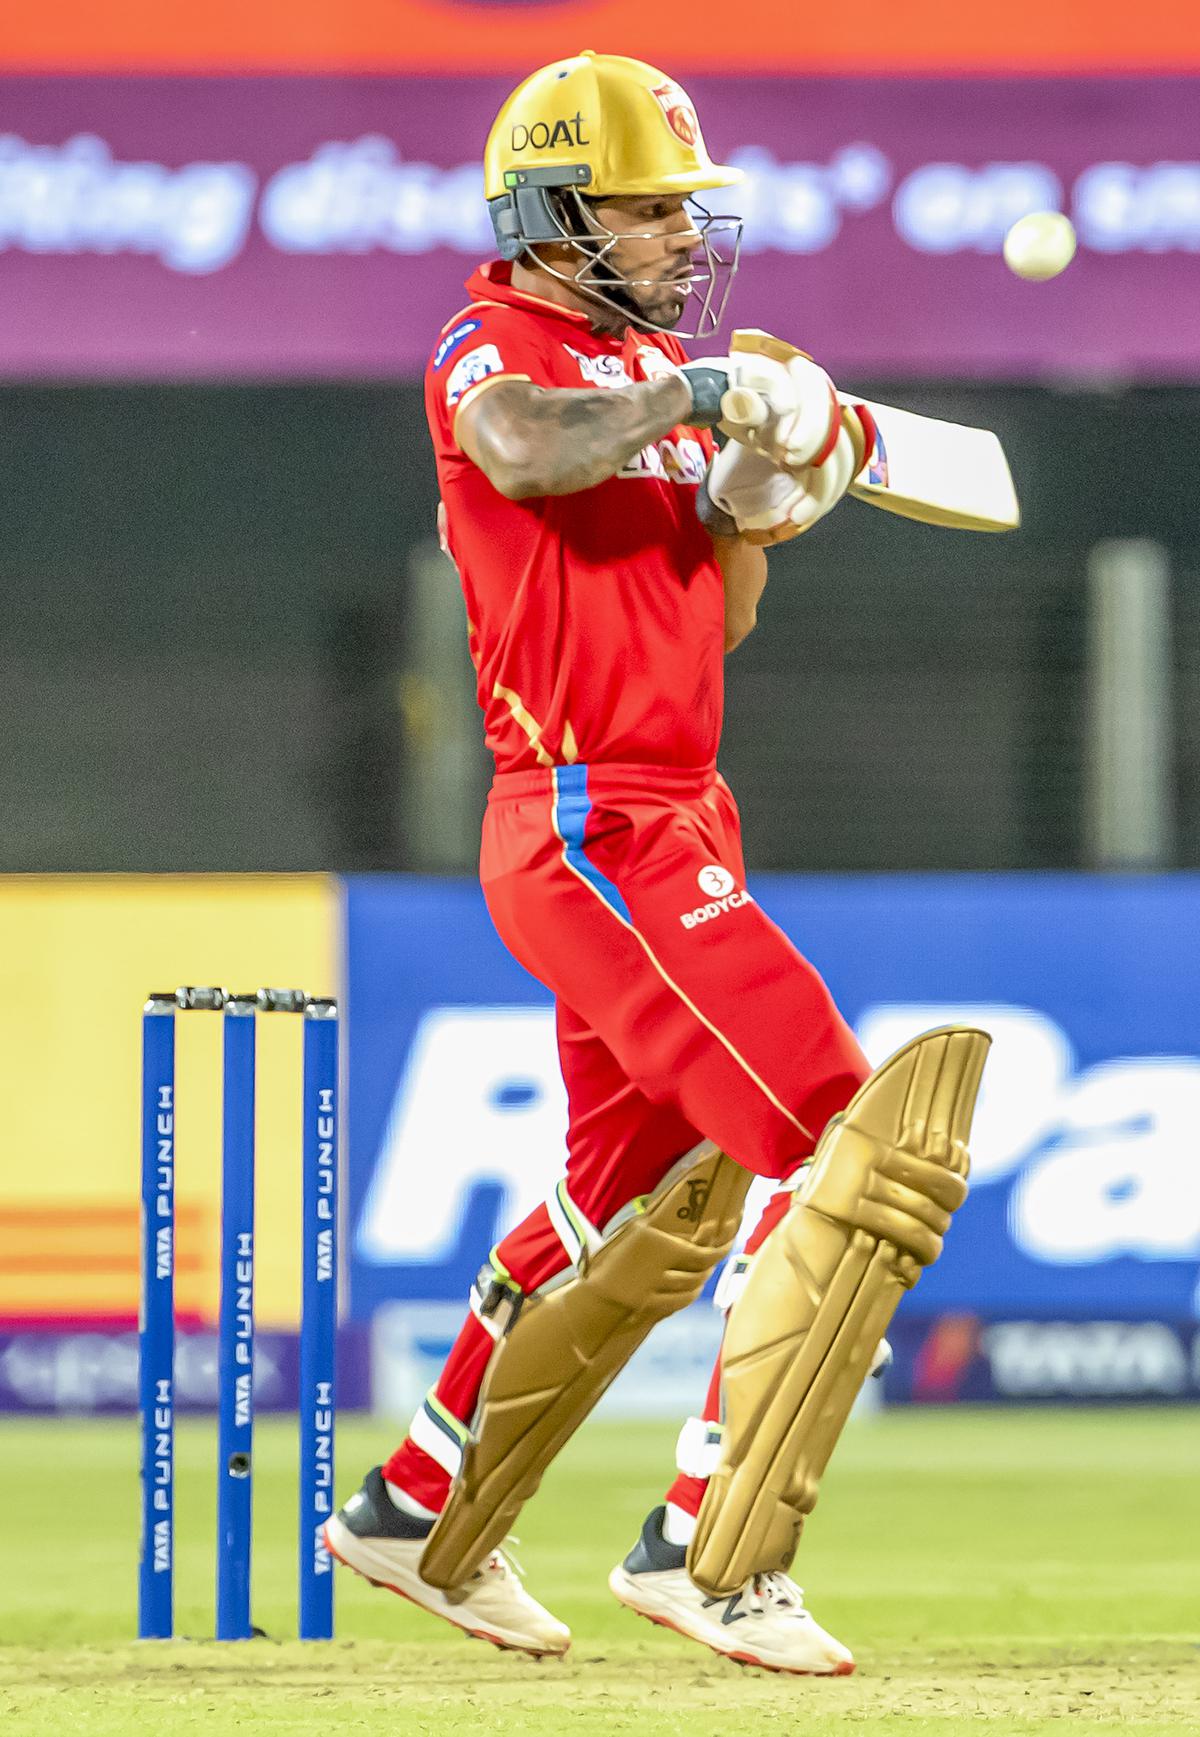 Shikhar Dhawan was steady to start with, but accelerated as his innings progressed to score a 50-ball 70.